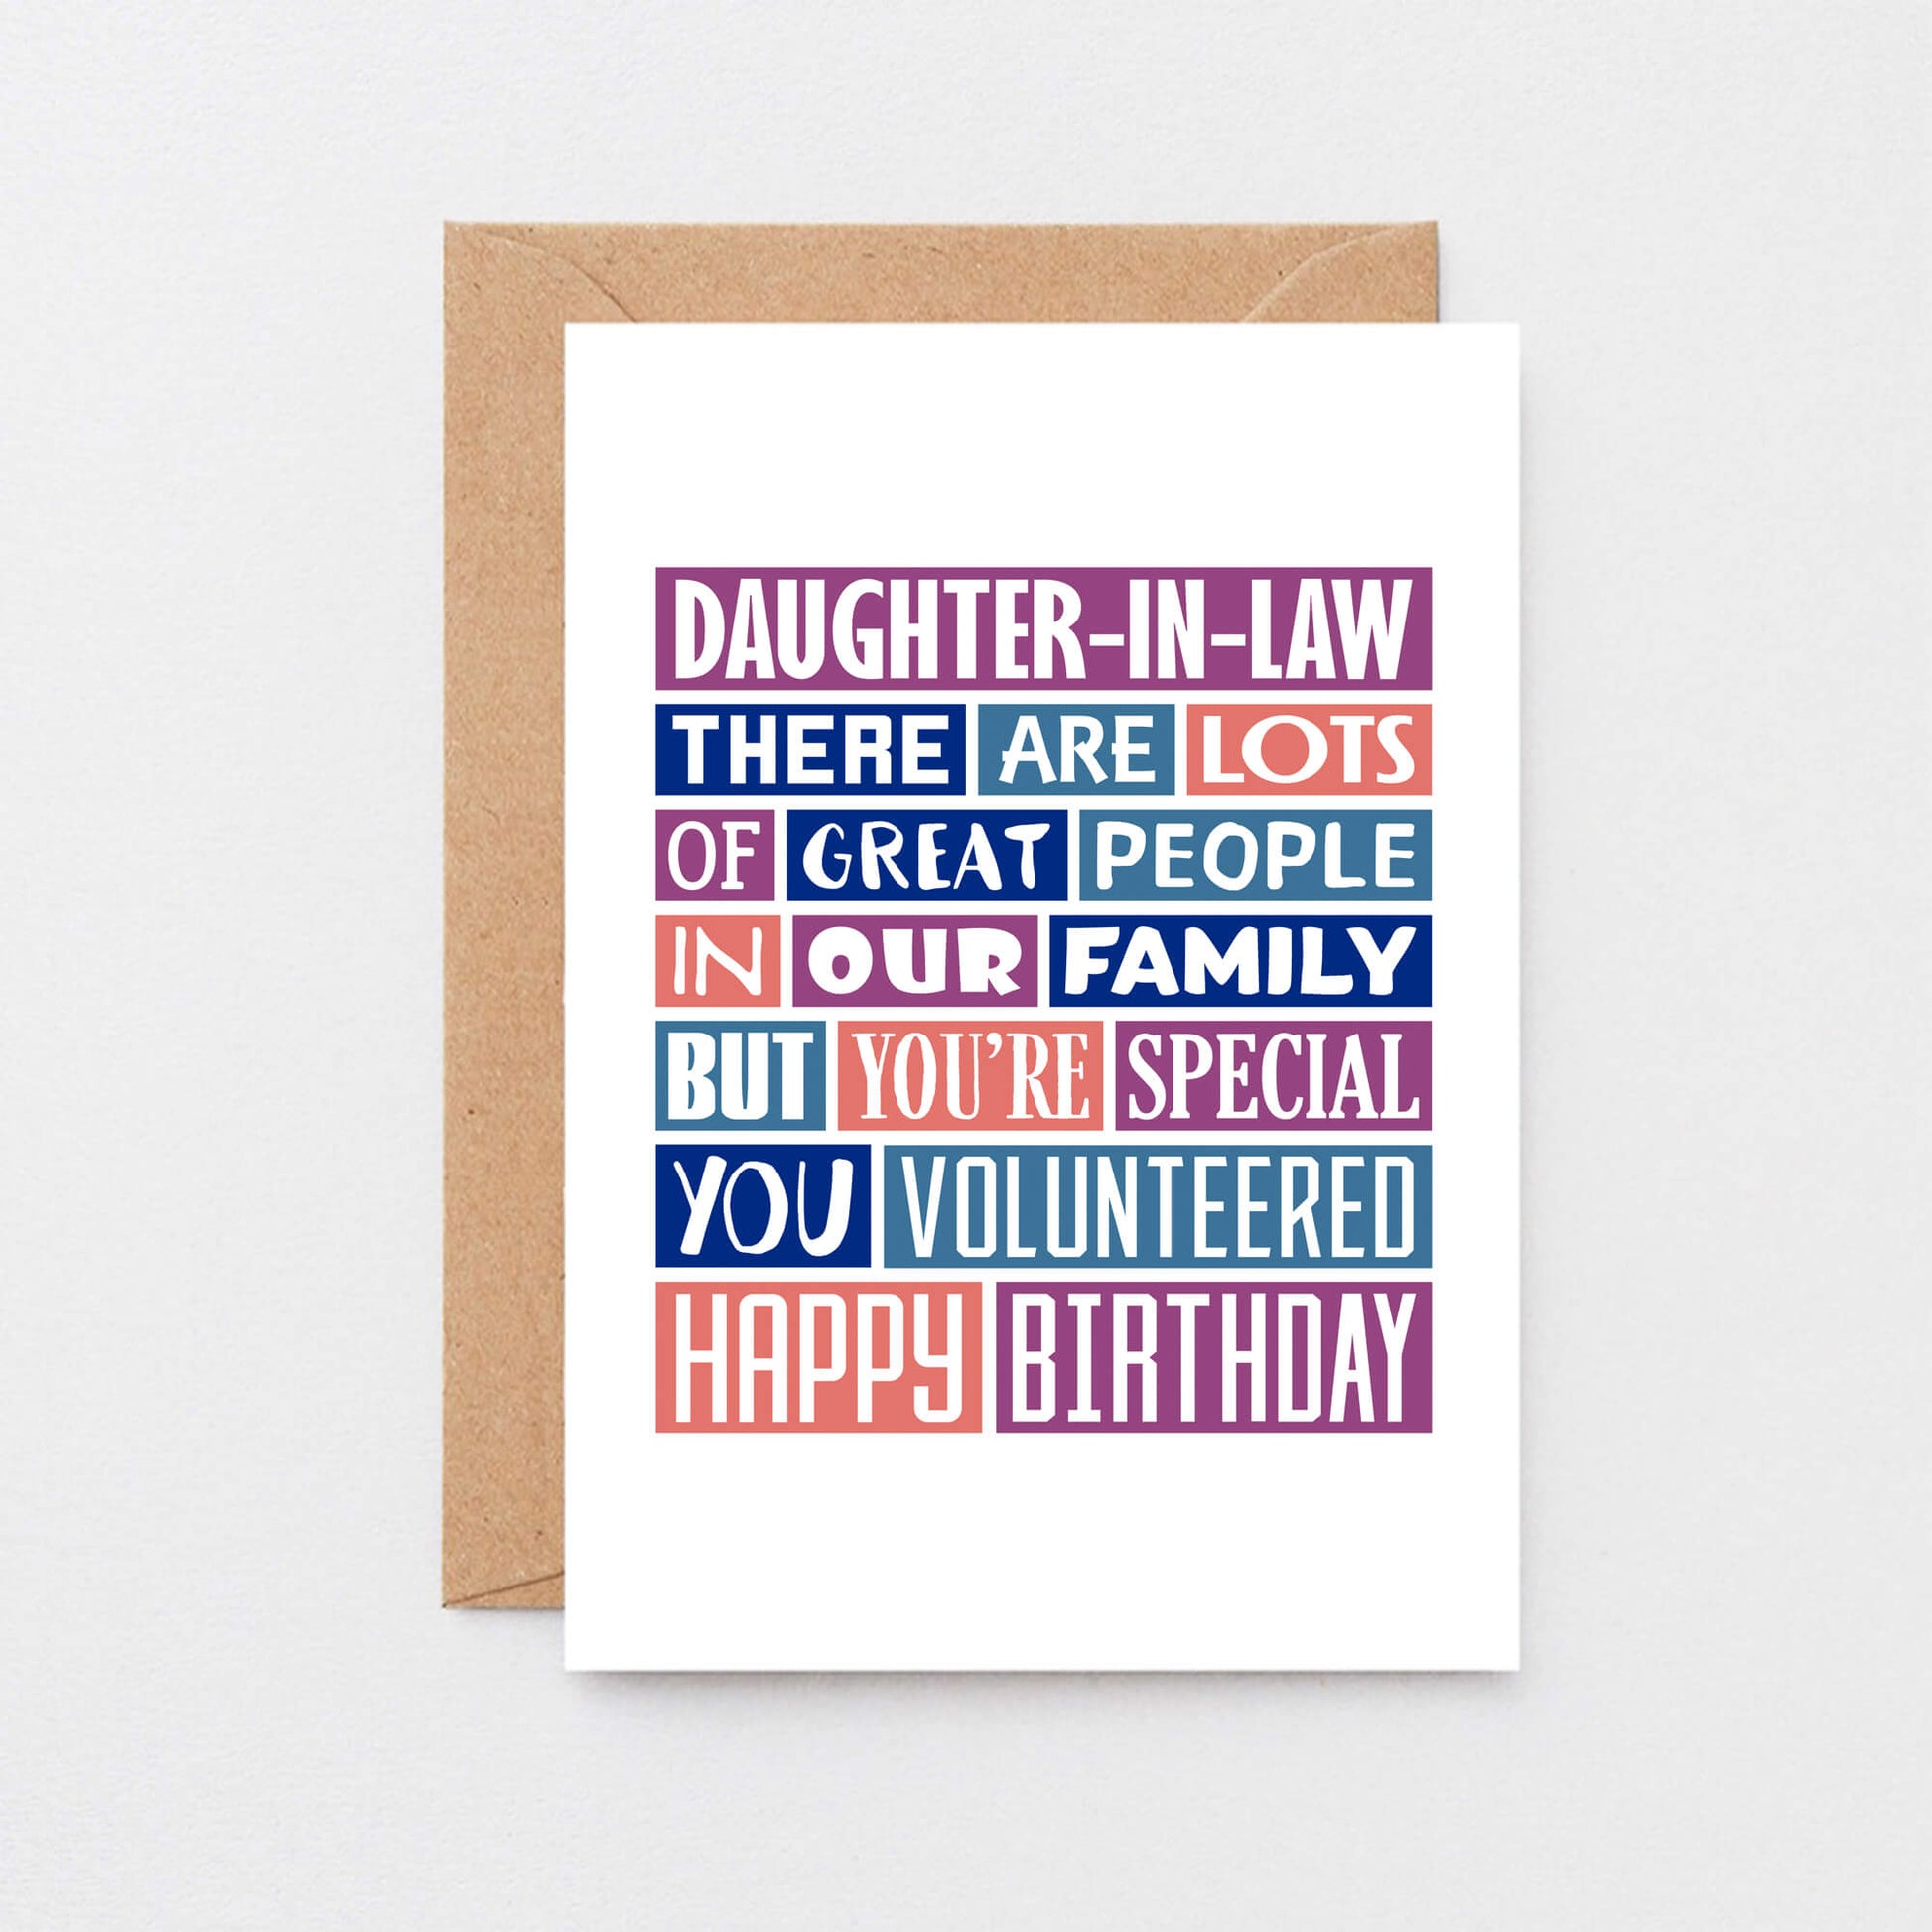 Big Daughter-in-Law Card by SixElevenCreations. Reads Daughter-in-Law There are lots of great people in our family but you're special. You volunteered. Happy birthday. Product Code SE0343A5